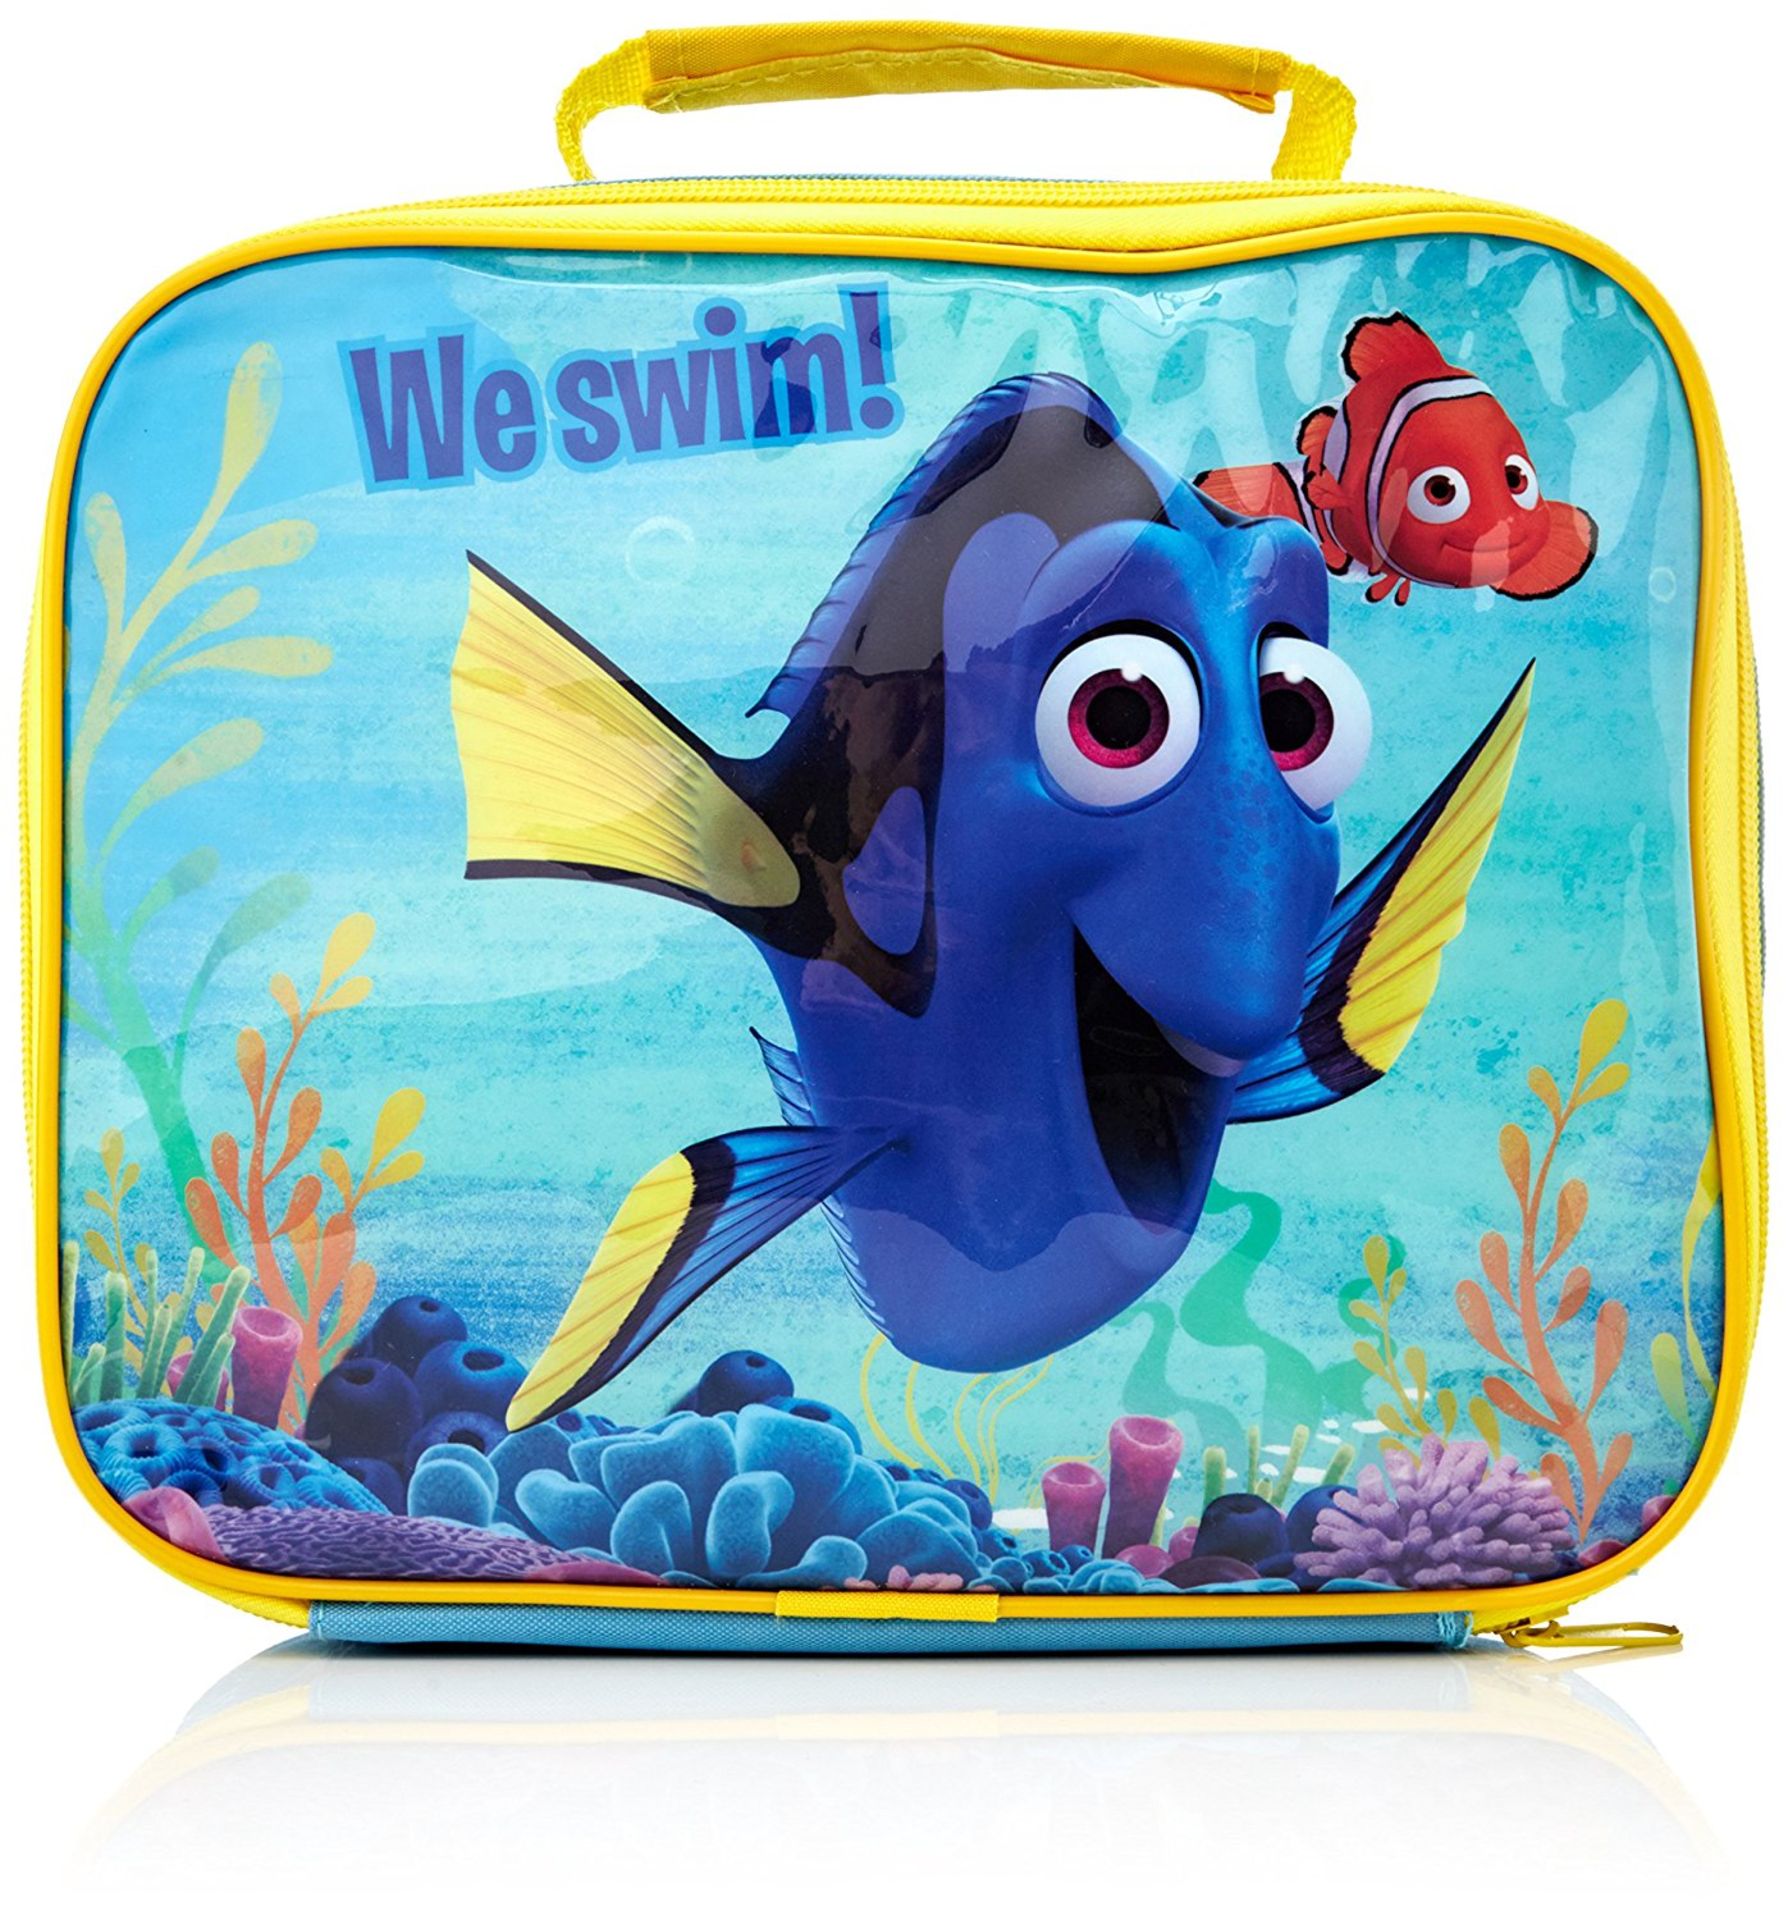 48 X Disney 7445225Hv Pixar Finding Dory Insulated Lunch Bag [Brand New In Retail Packaging]